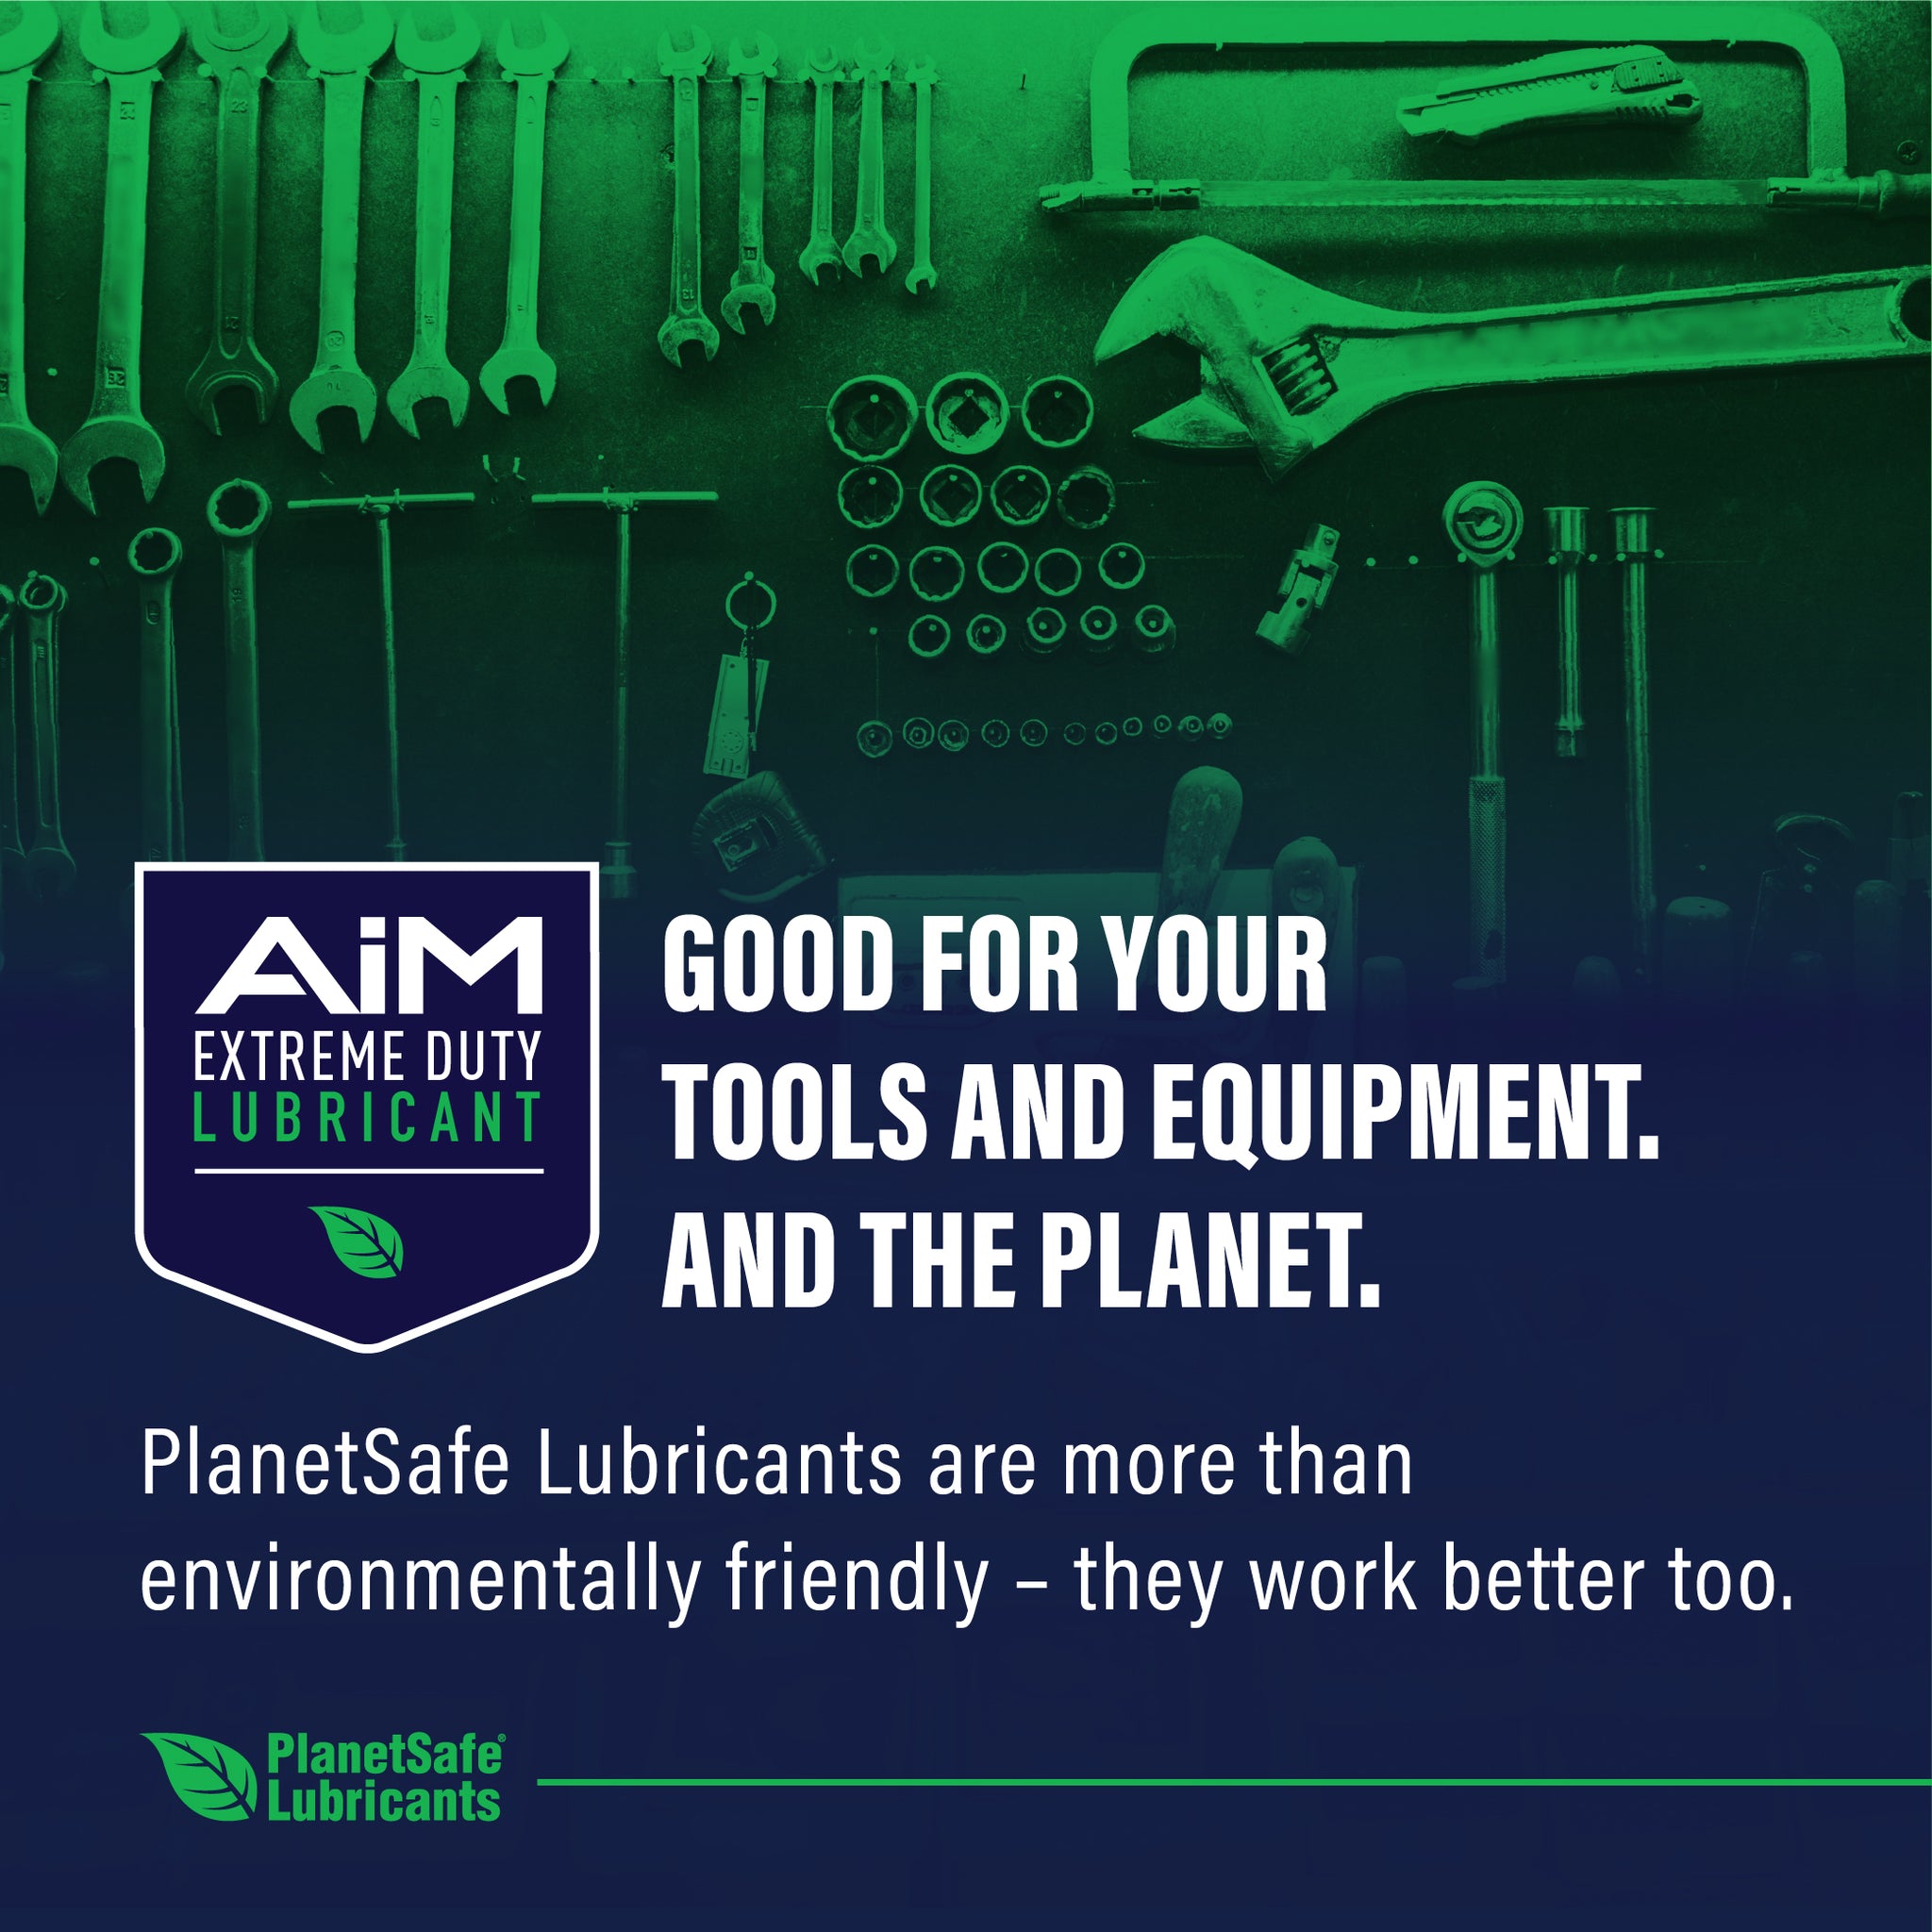 Pneumatic Tool and Air Tools Lubricant - PlanetSafe AIM Lubricating oil - what is the best lube for air tools - nail gun compressor safe odorless